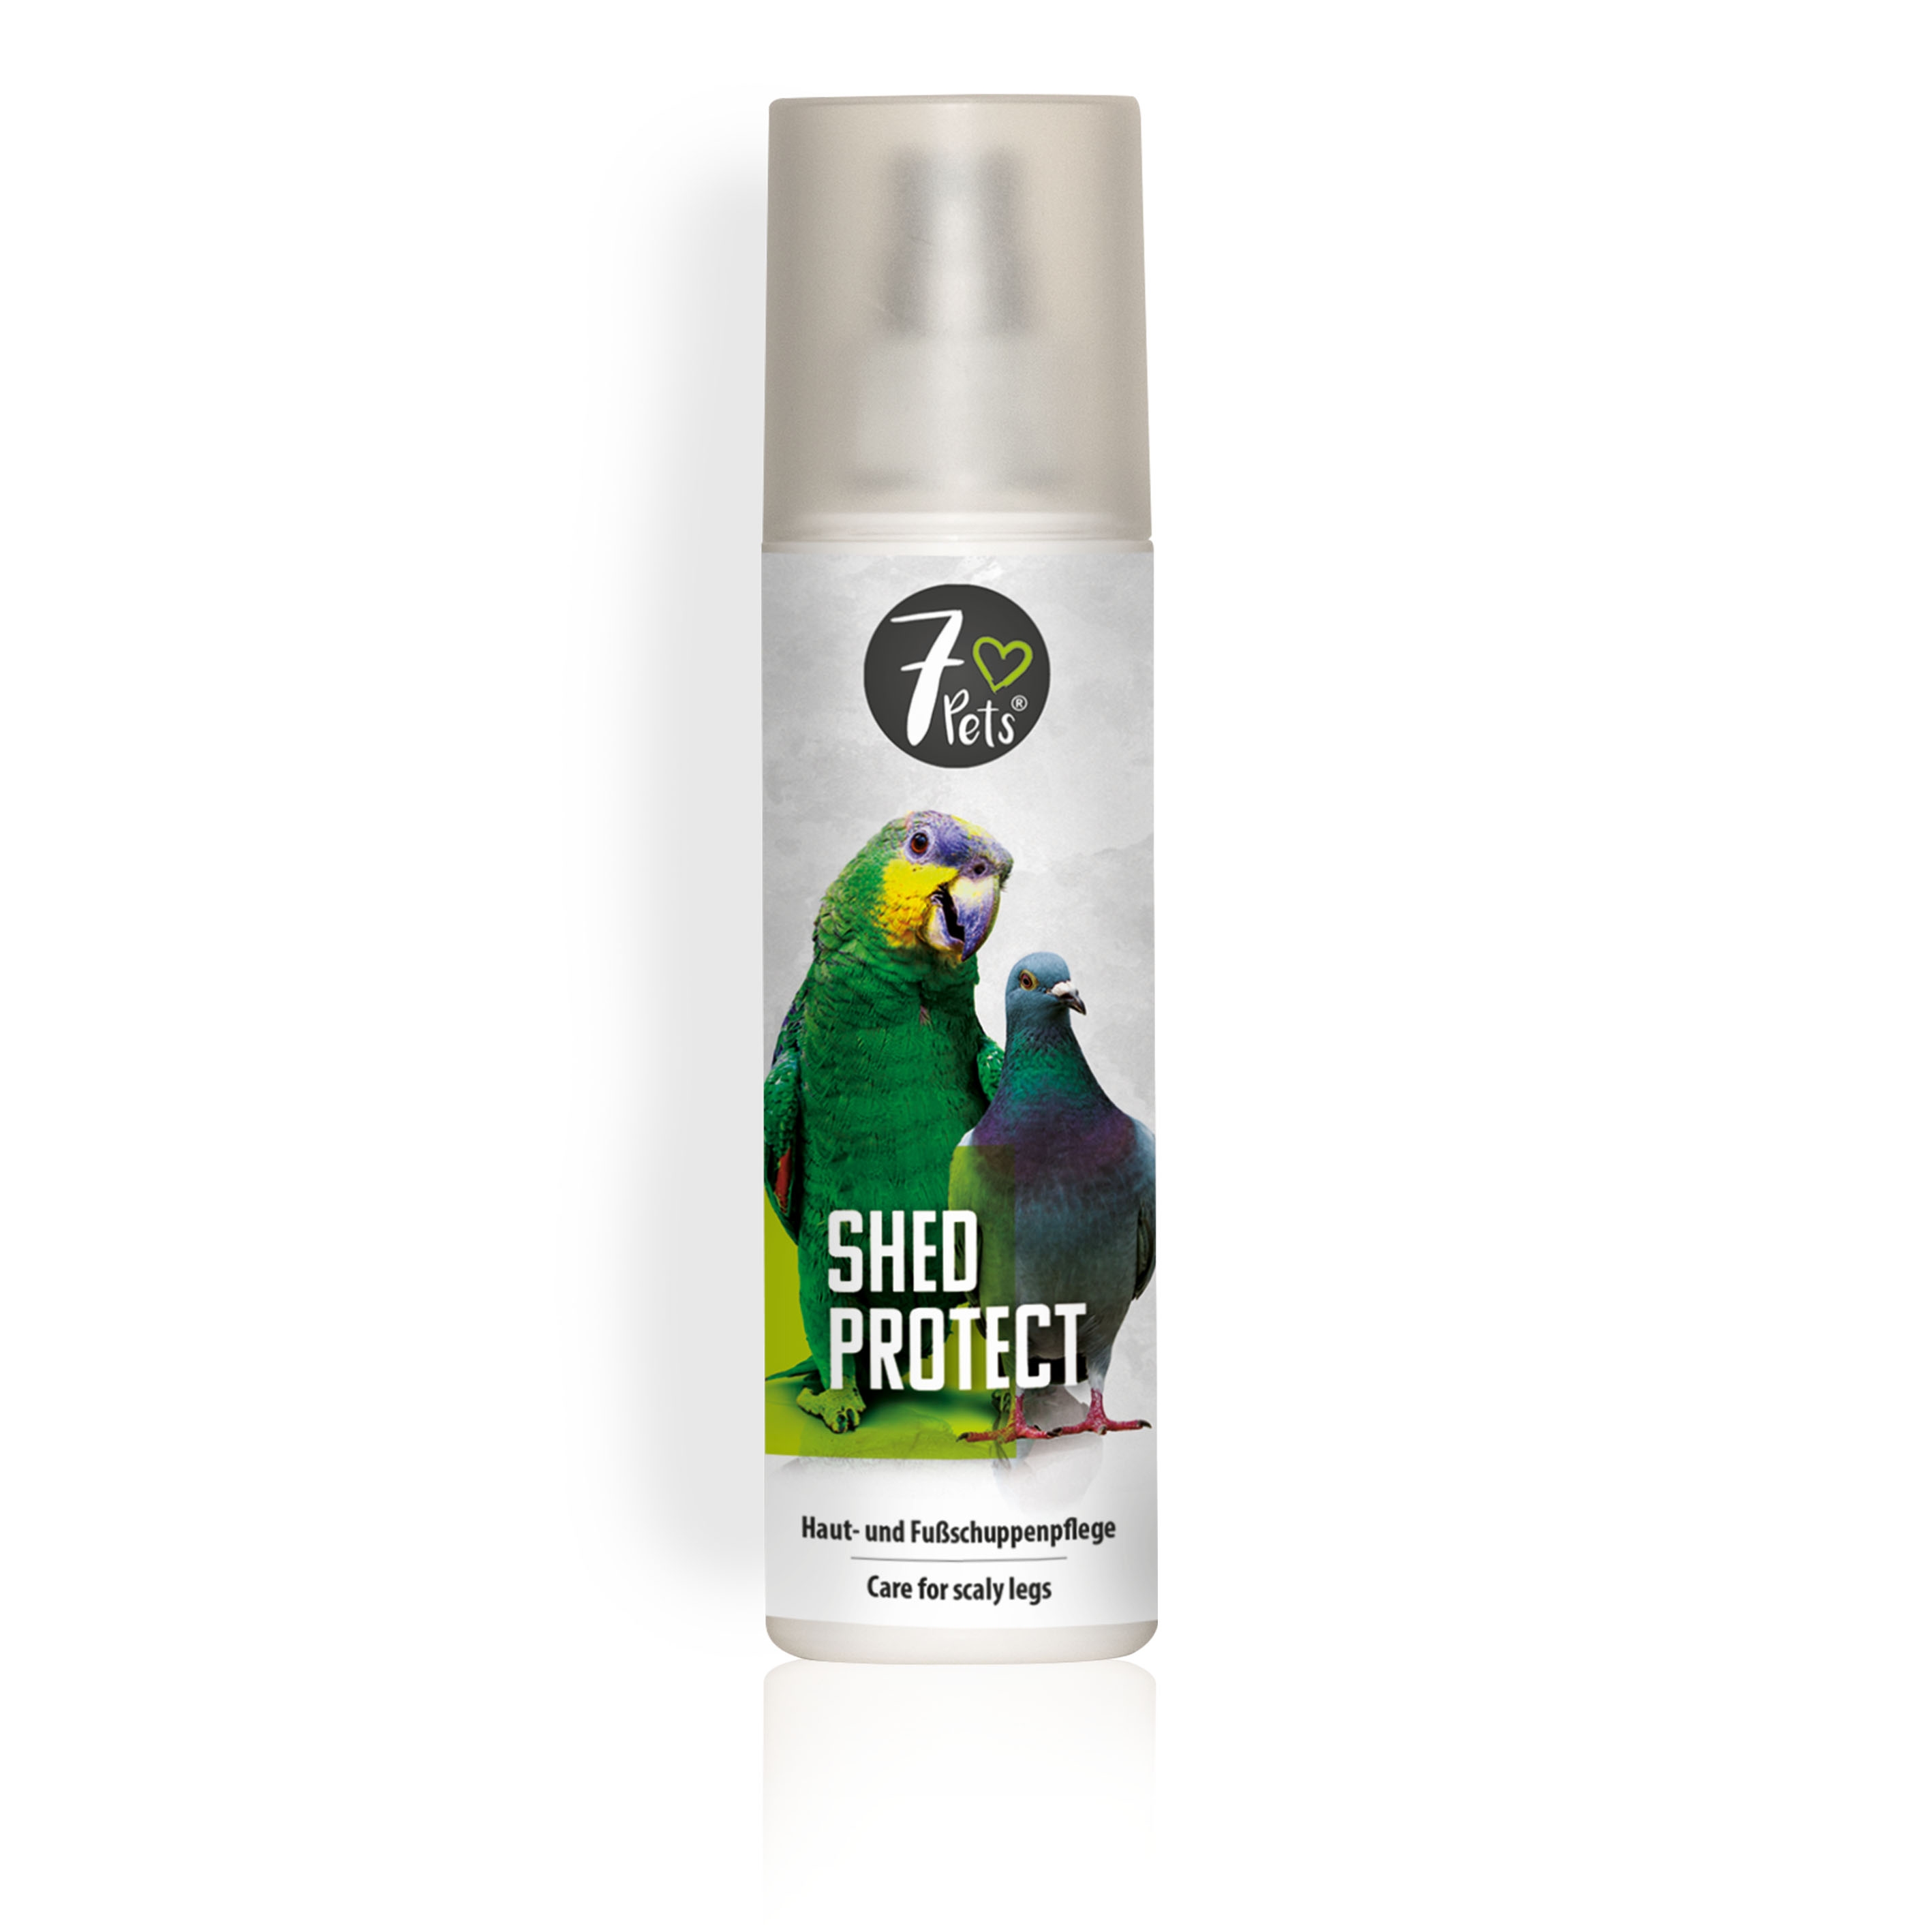 Shed Protect, 200 ml 7Pets imagine 2022